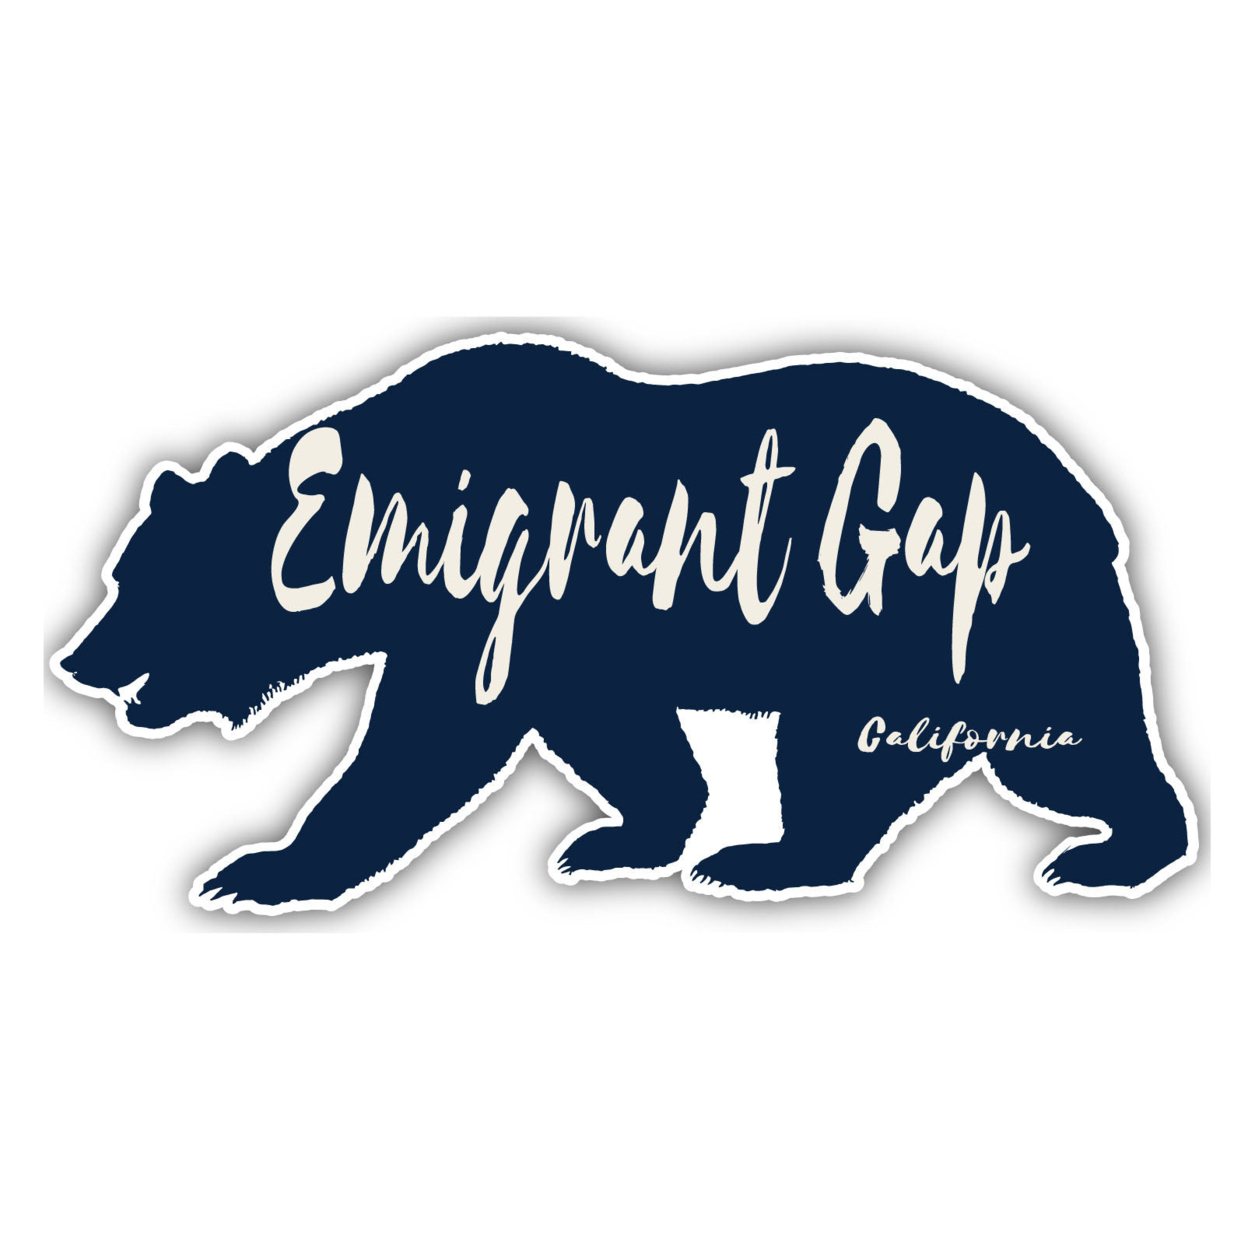 Emigrant Gap California Souvenir Decorative Stickers (Choose Theme And Size) - 4-Pack, 12-Inch, Great Outdoors